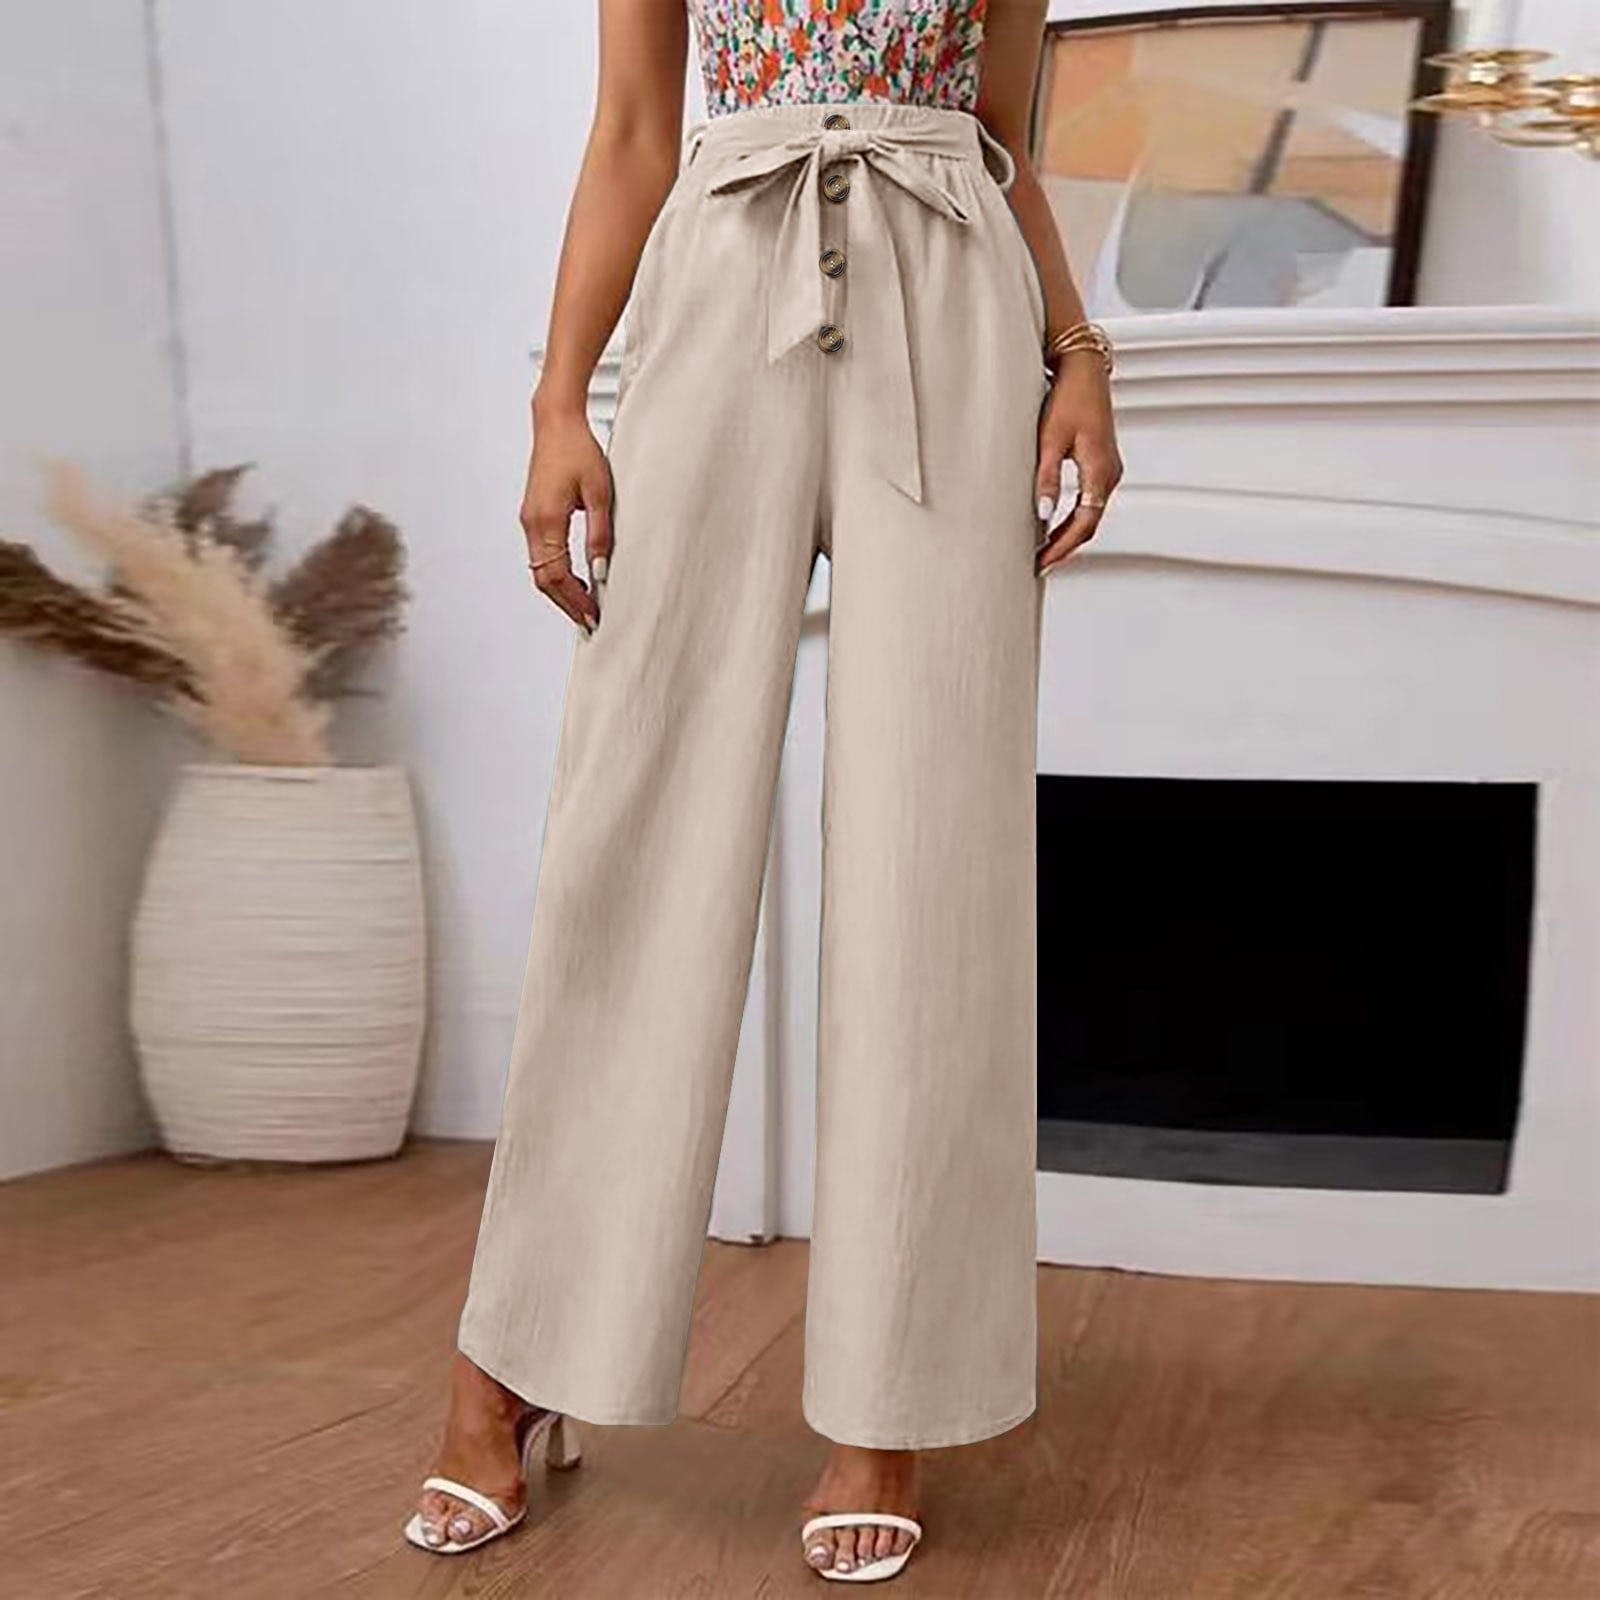 SHEIN Khaki Beige High Waisted Paper Bag Trousers Straight Leg Pants Size  Small | Trousers women high waisted, Straight leg pants, Trousers women